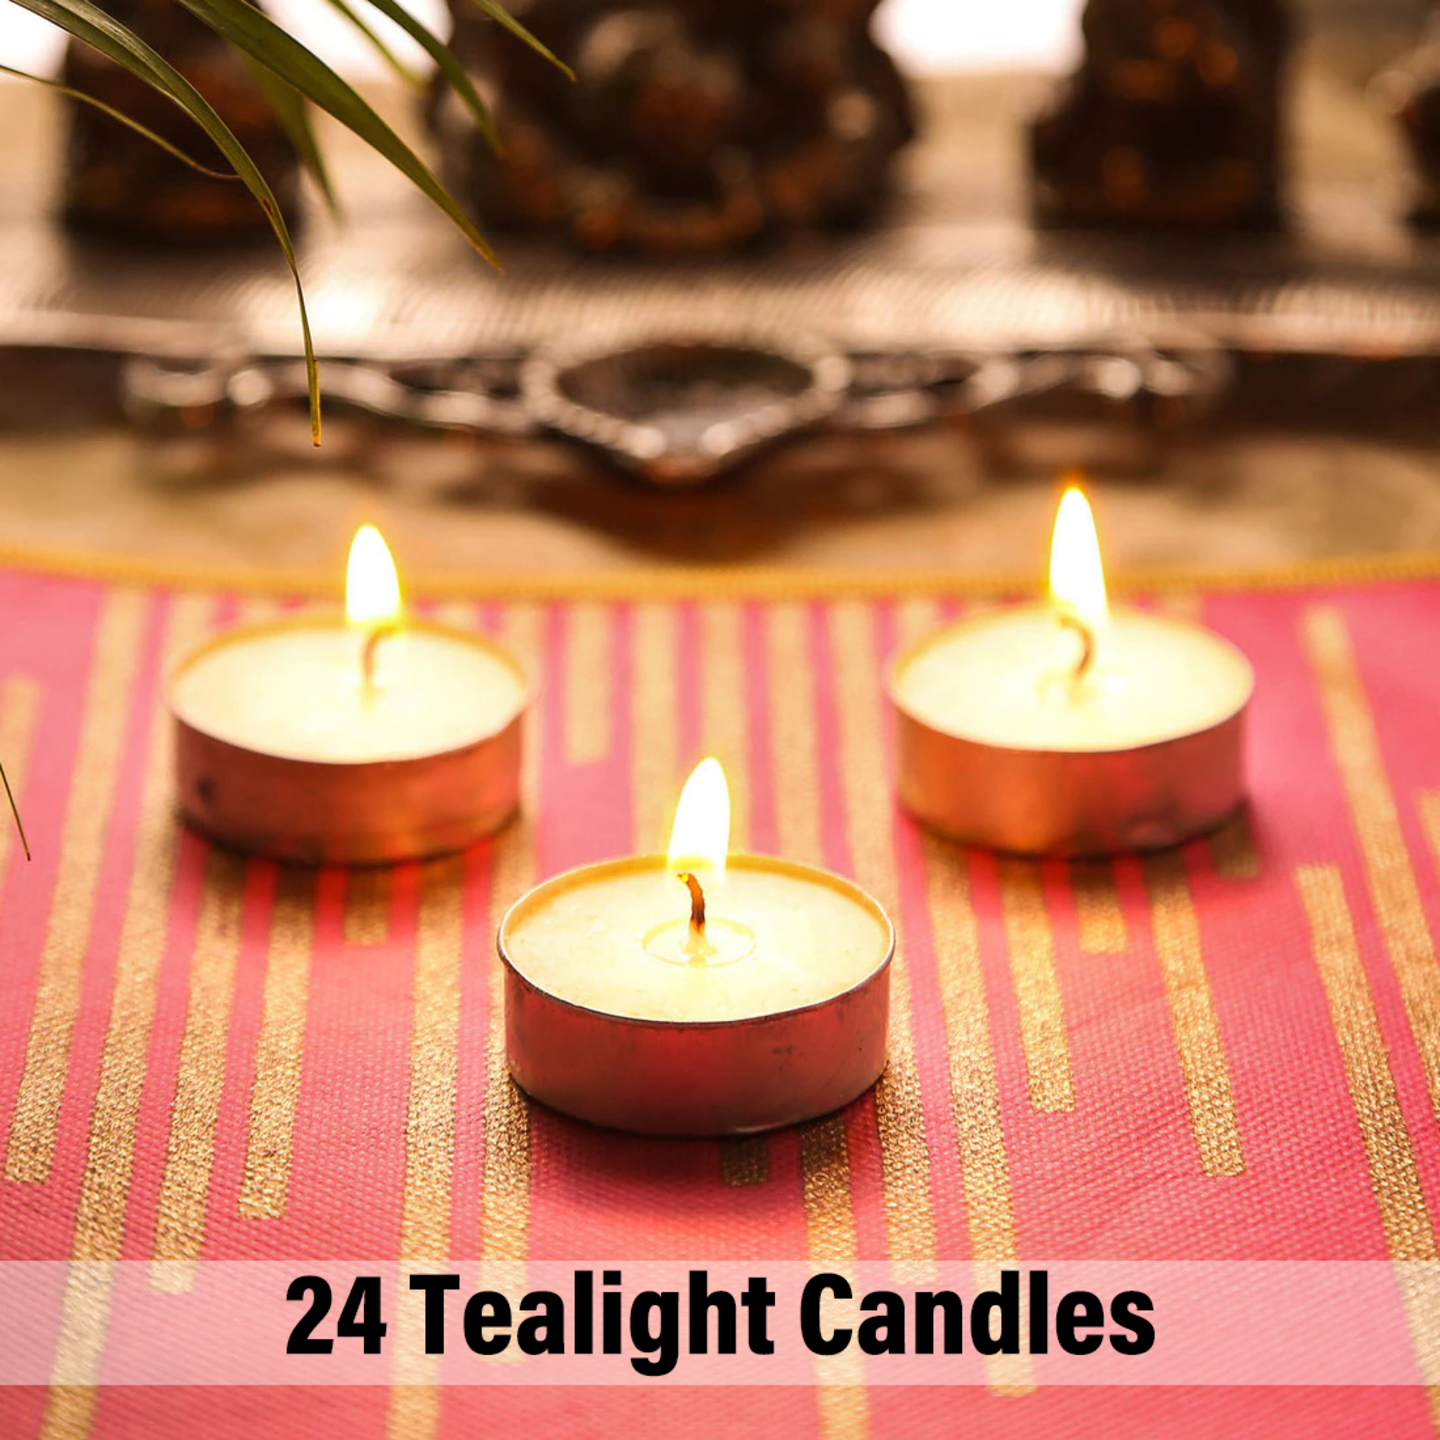 Tealight Candles - 24 Candles